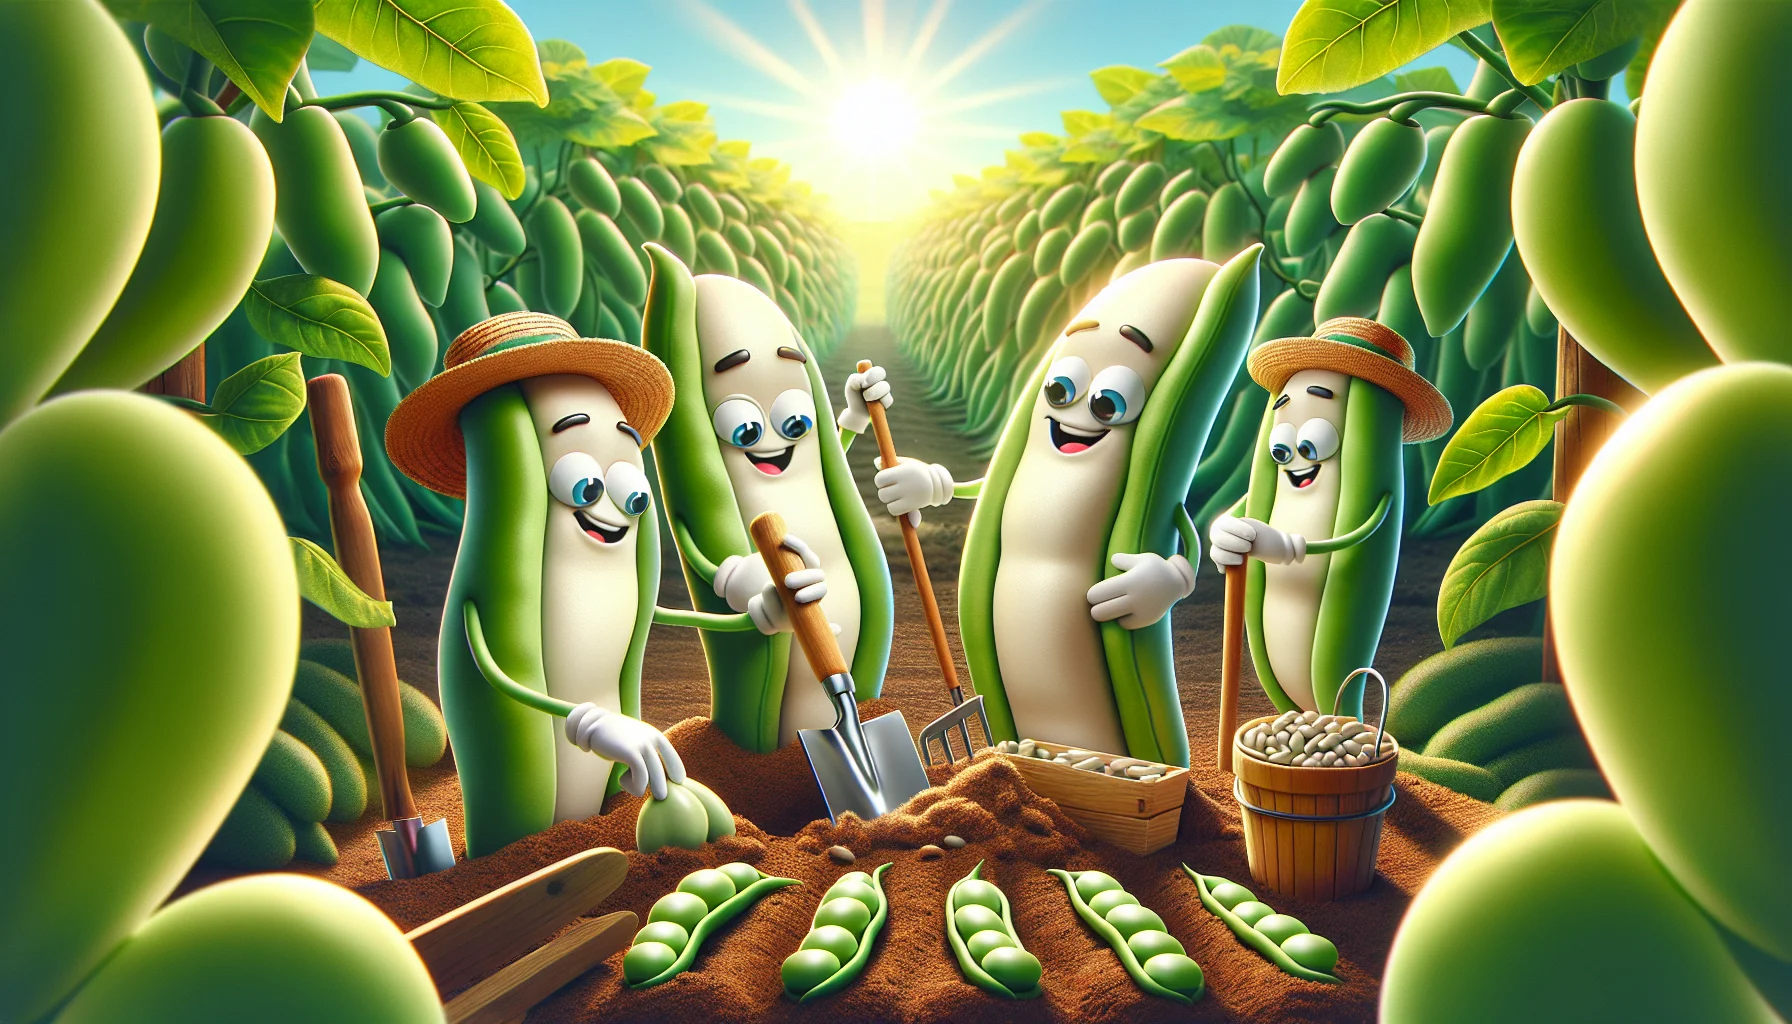 Prepare a captivating illustration where a group of cartoonish blanched green beans are in a humorous scenario, promoting the joys of gardening. In this animated world, the beans are portraying gardener roles, wearing small straw hats, and handling tiny gardening tools. They are cheerfully working together in a sunlit garden, tilling the soil, and planting green bean seeds. The background is abundant with ripe green bean plants growing in rows. The sight is filled with positive energy, making the act of gardening look fun and enjoyable, thereby encouraging people towards home gardening.